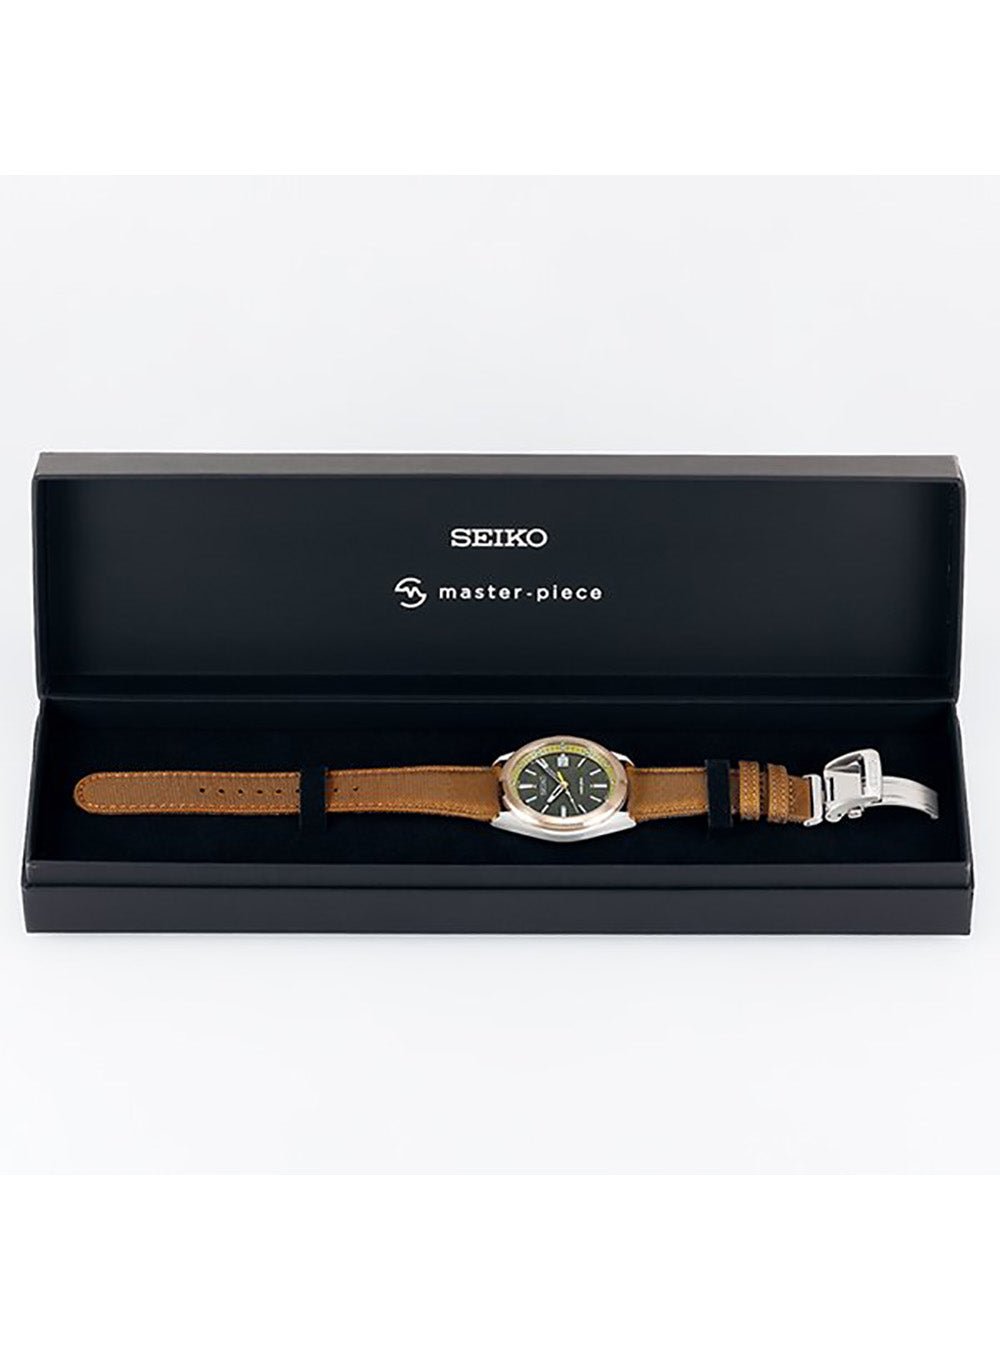 SEIKO SELECTION MASTER PIECE LIMITED EDITION SBTM314 MADE IN JAPAN JDMWRISTWATCHjapan-select